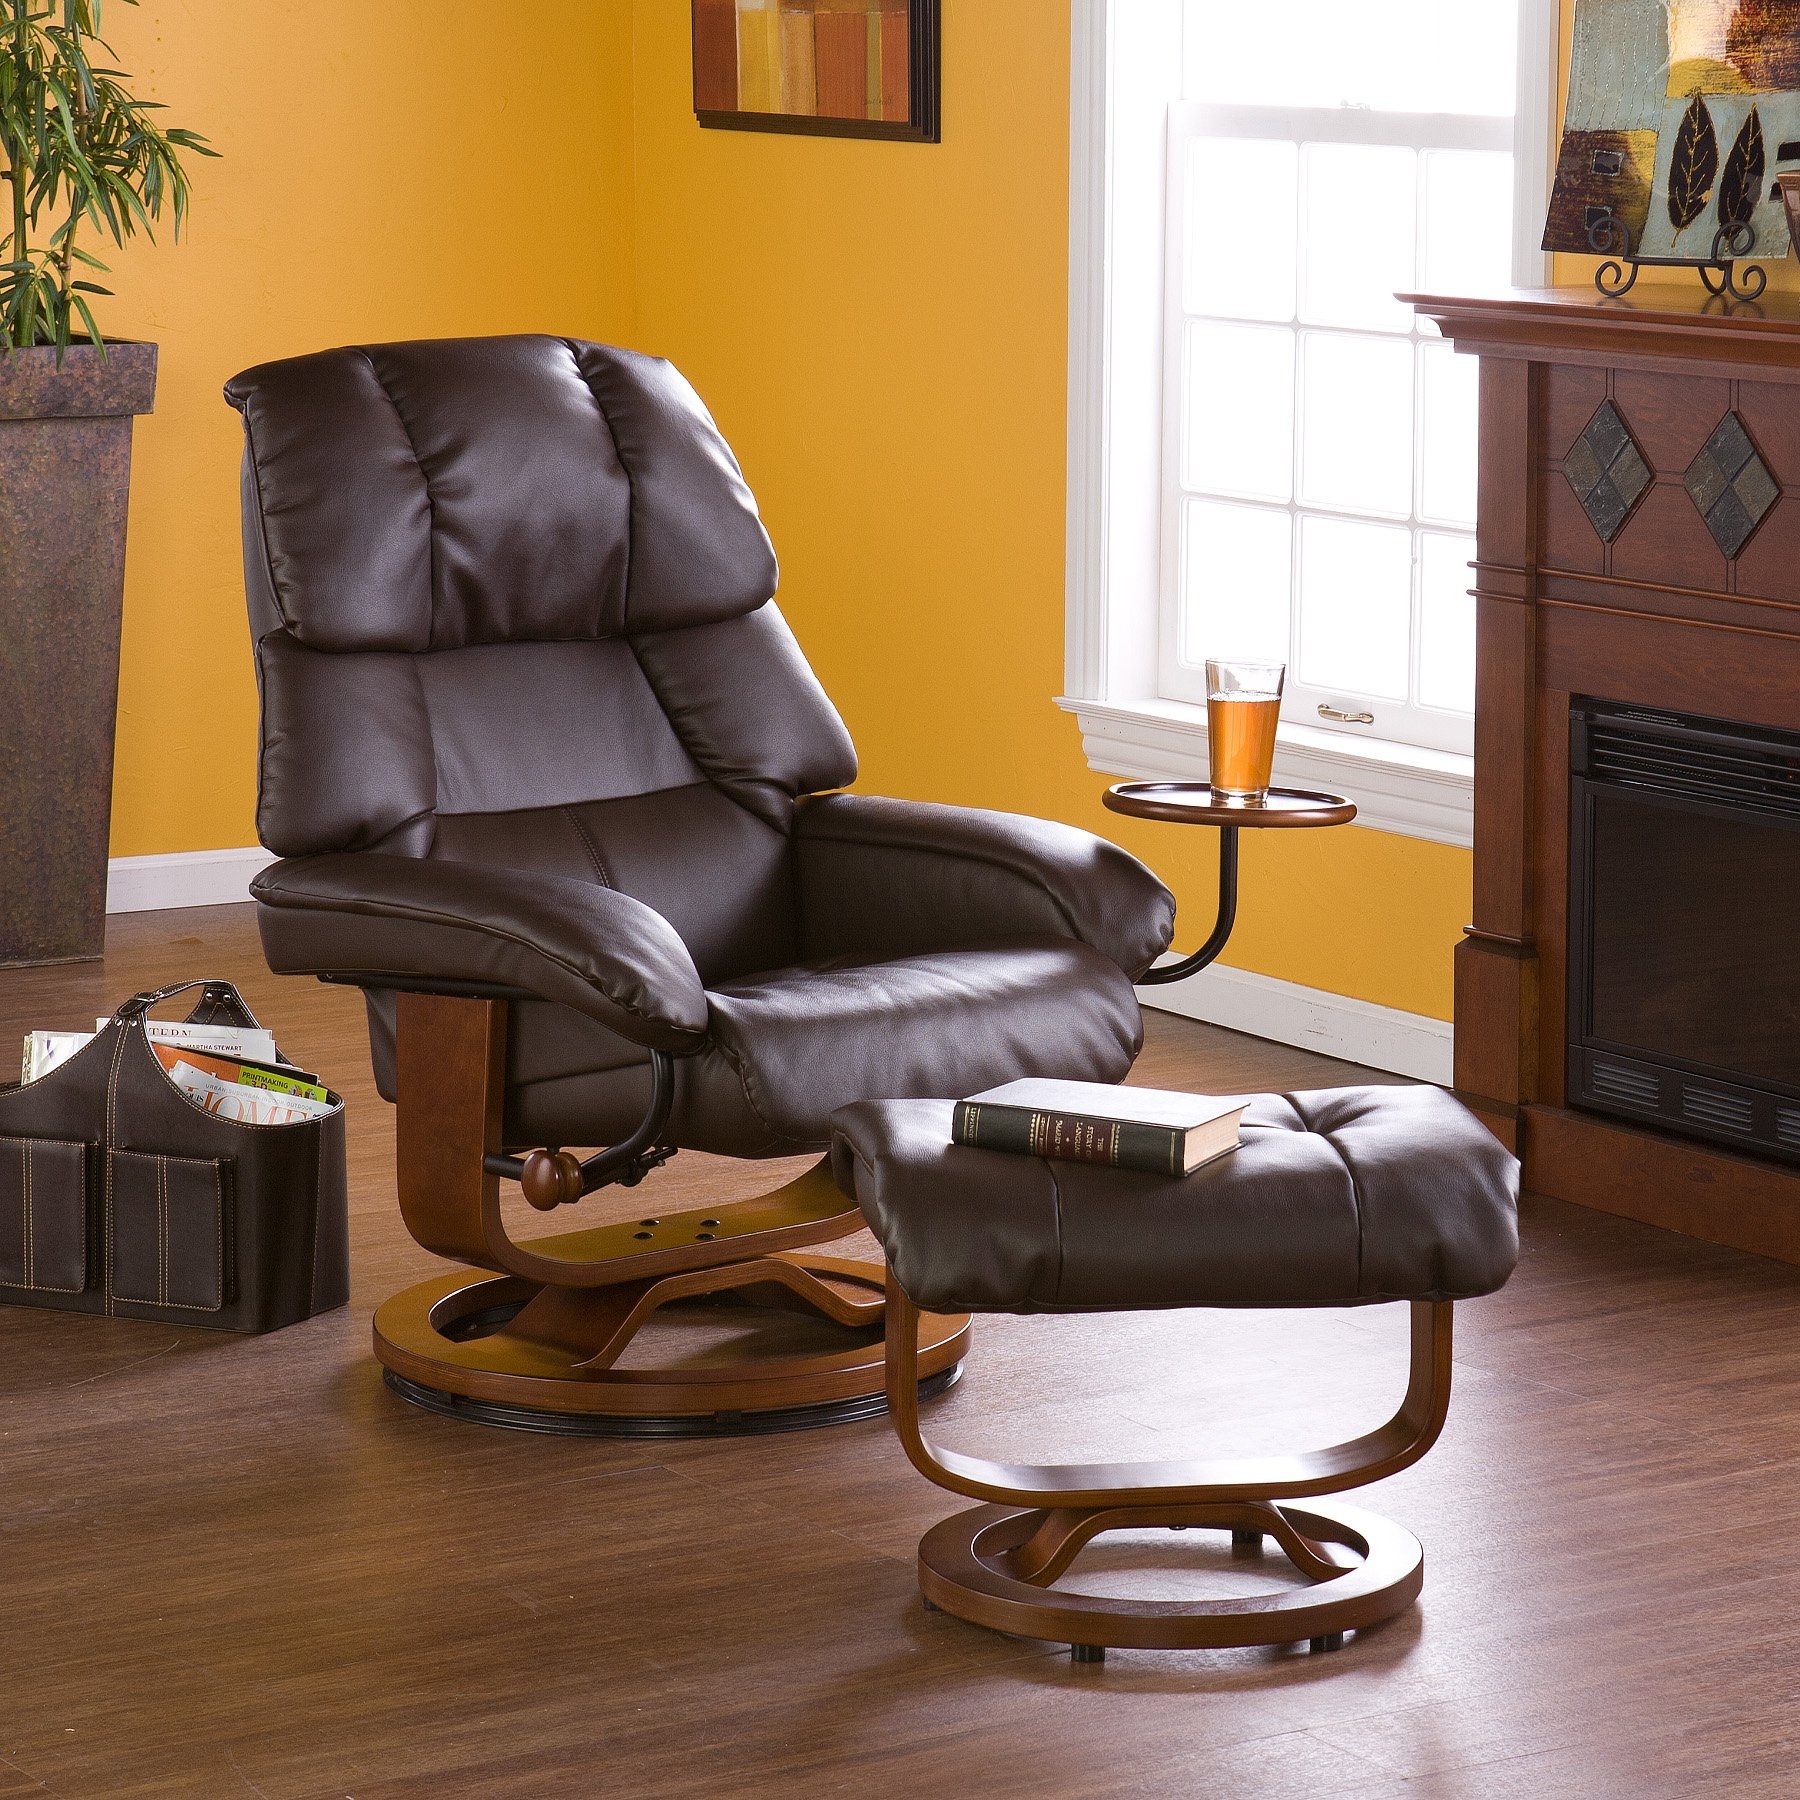 Recliner chairs with ottoman